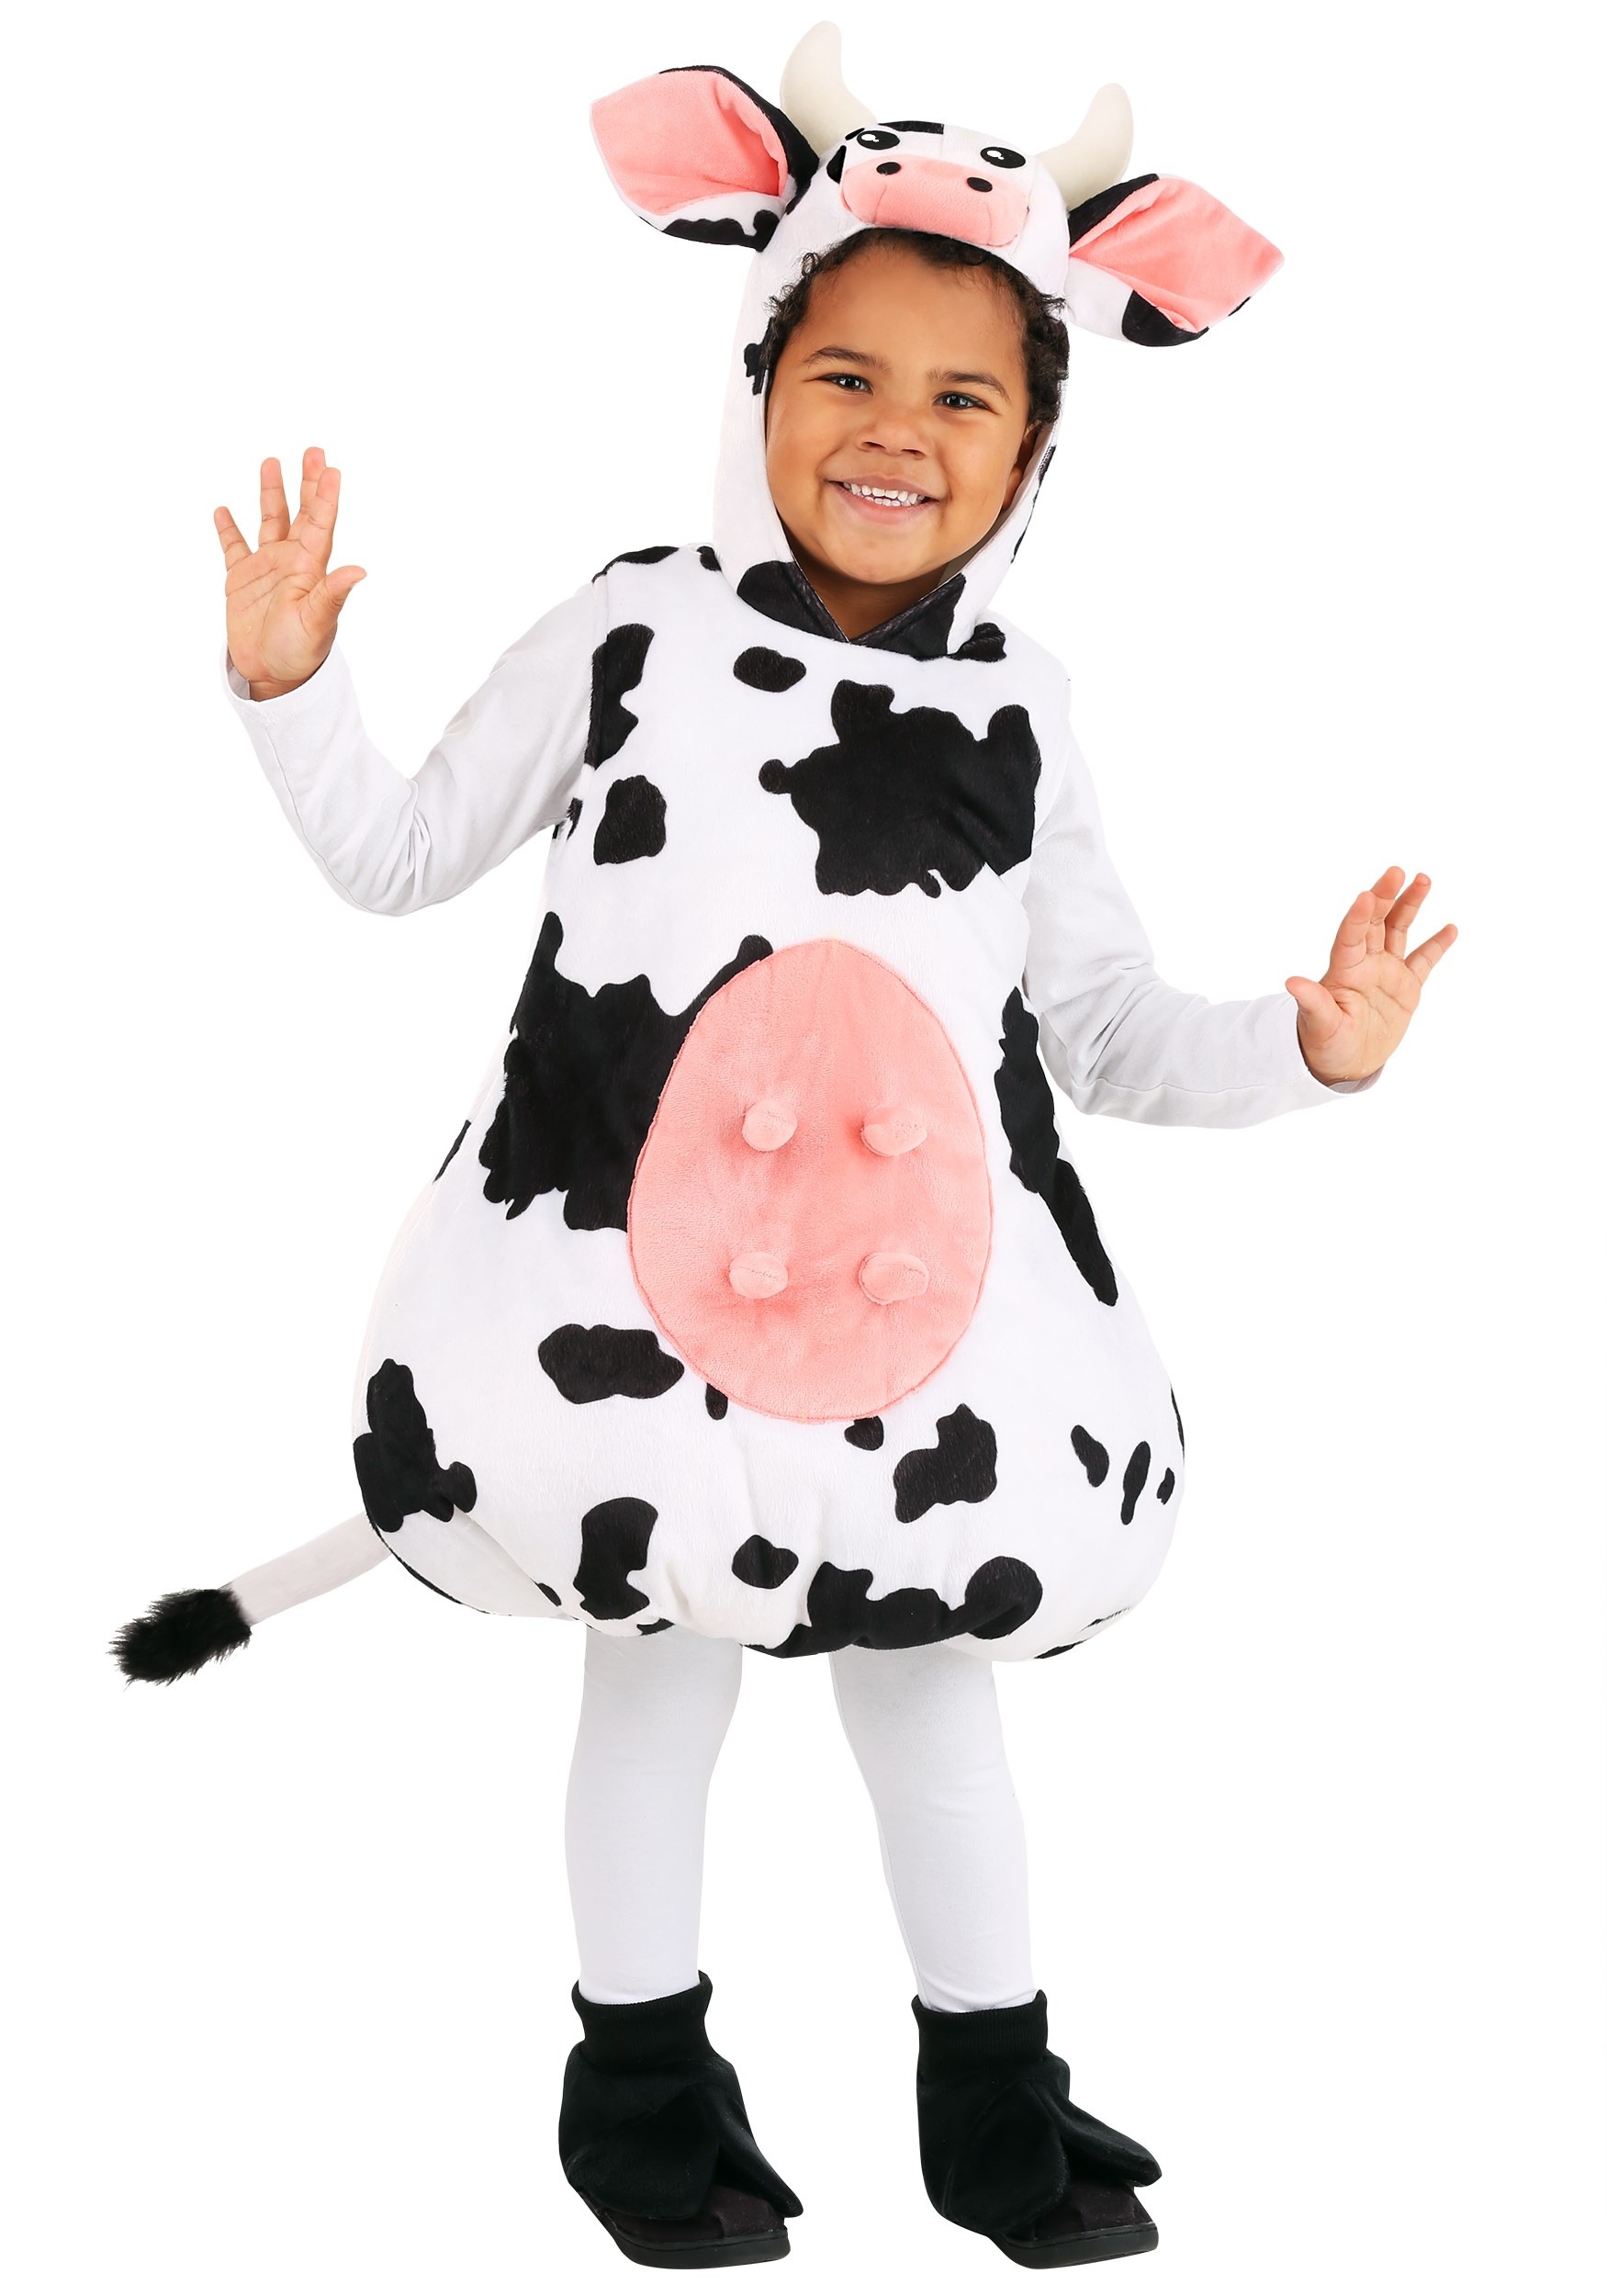 Photos - Fancy Dress Bubble FUN Costumes  Cow Toddler Costume Pink/Black/White 